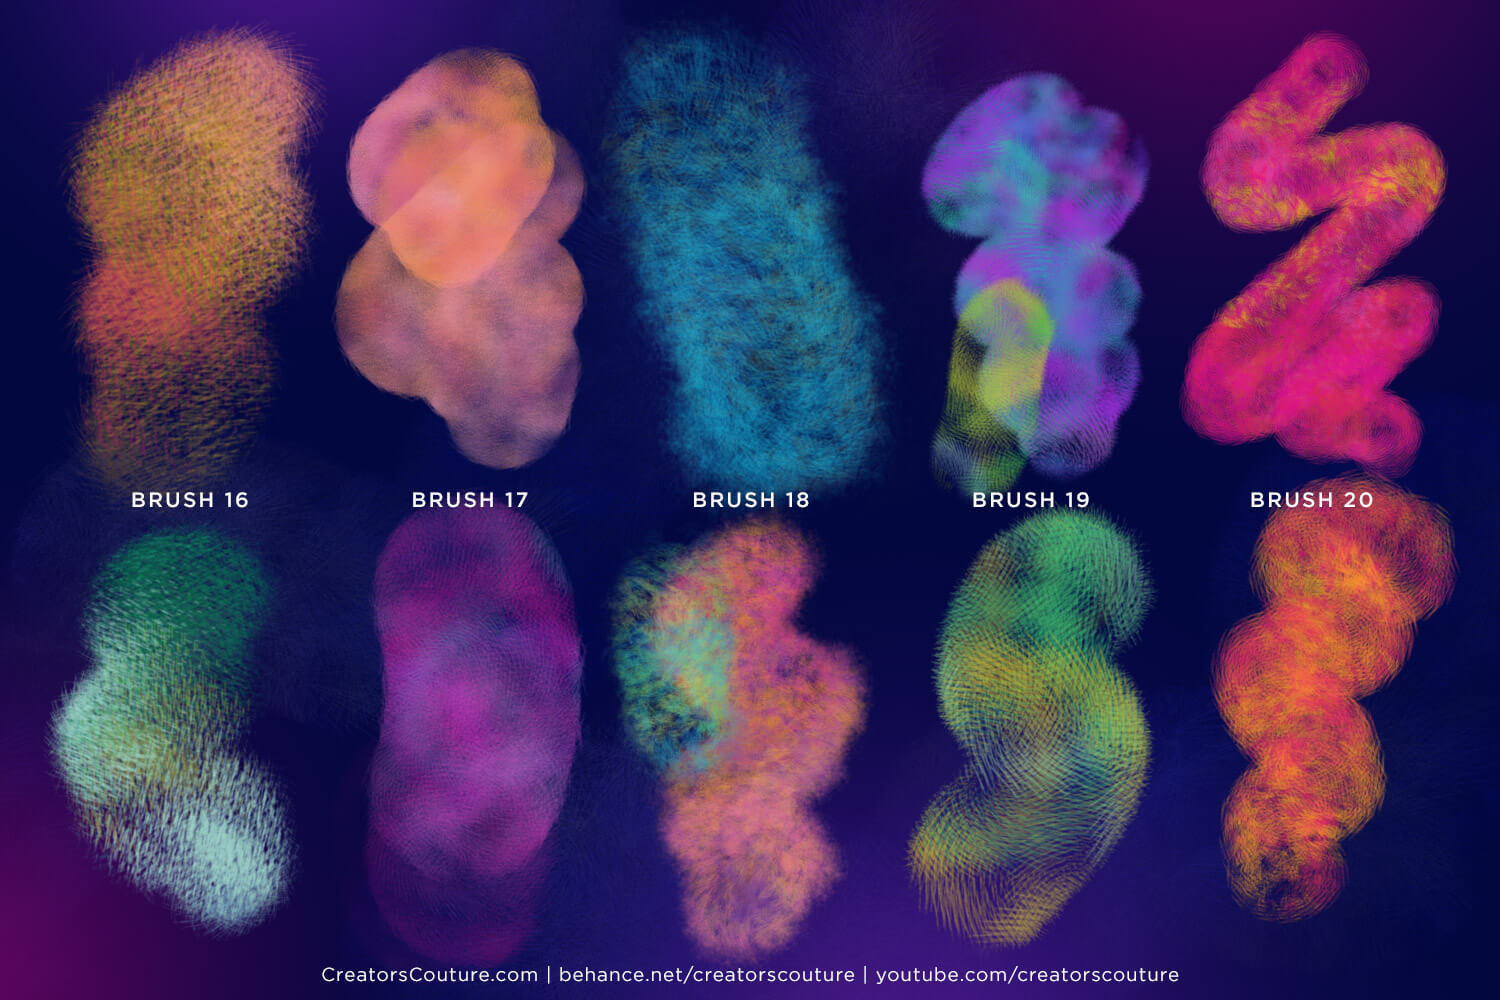 watercolor photoshop brushes with a translucent effect, brushes 16-20 chart